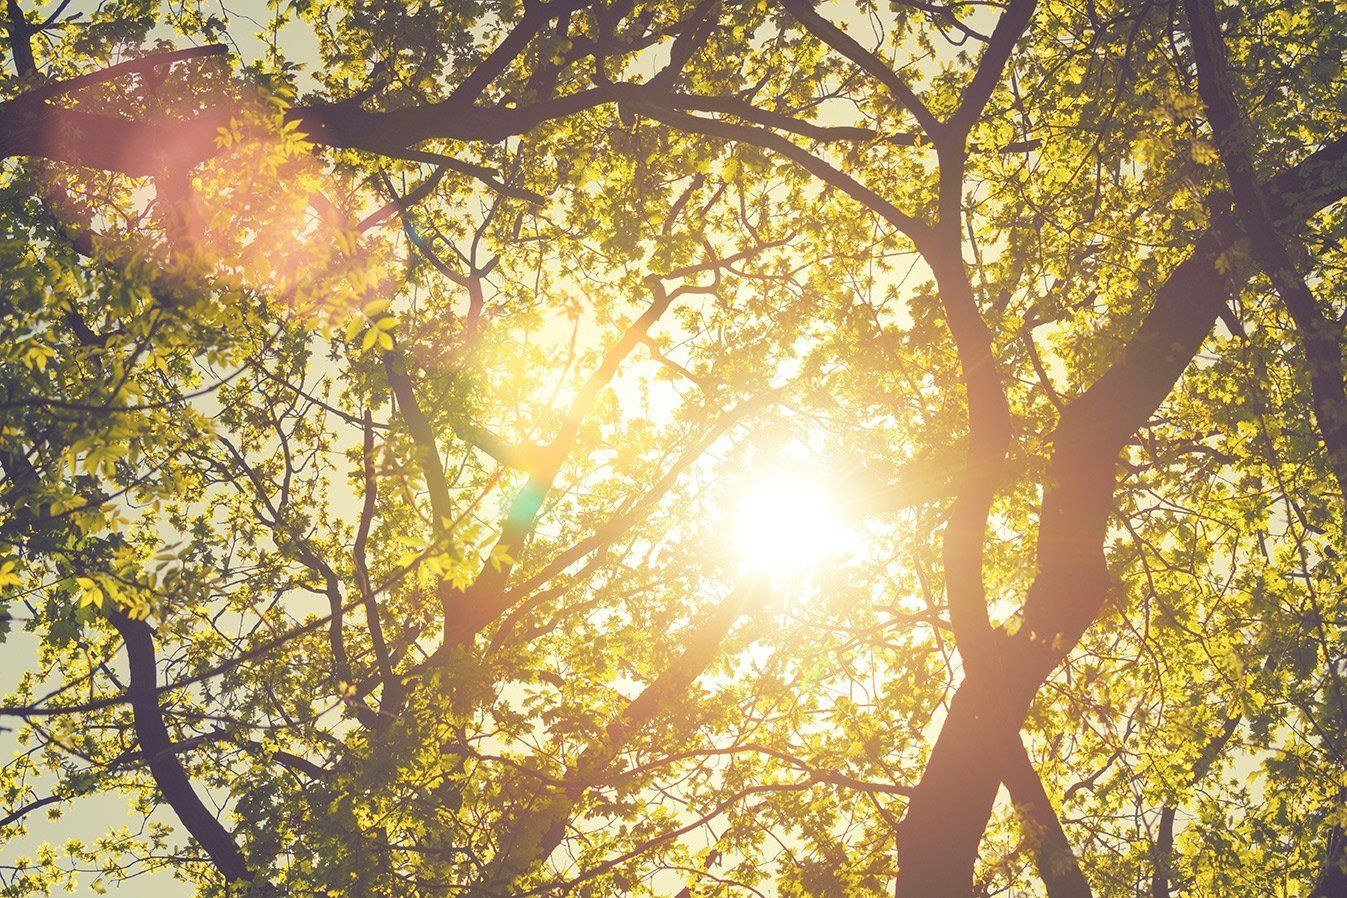 View of the sun through a canopy of trees in a forest